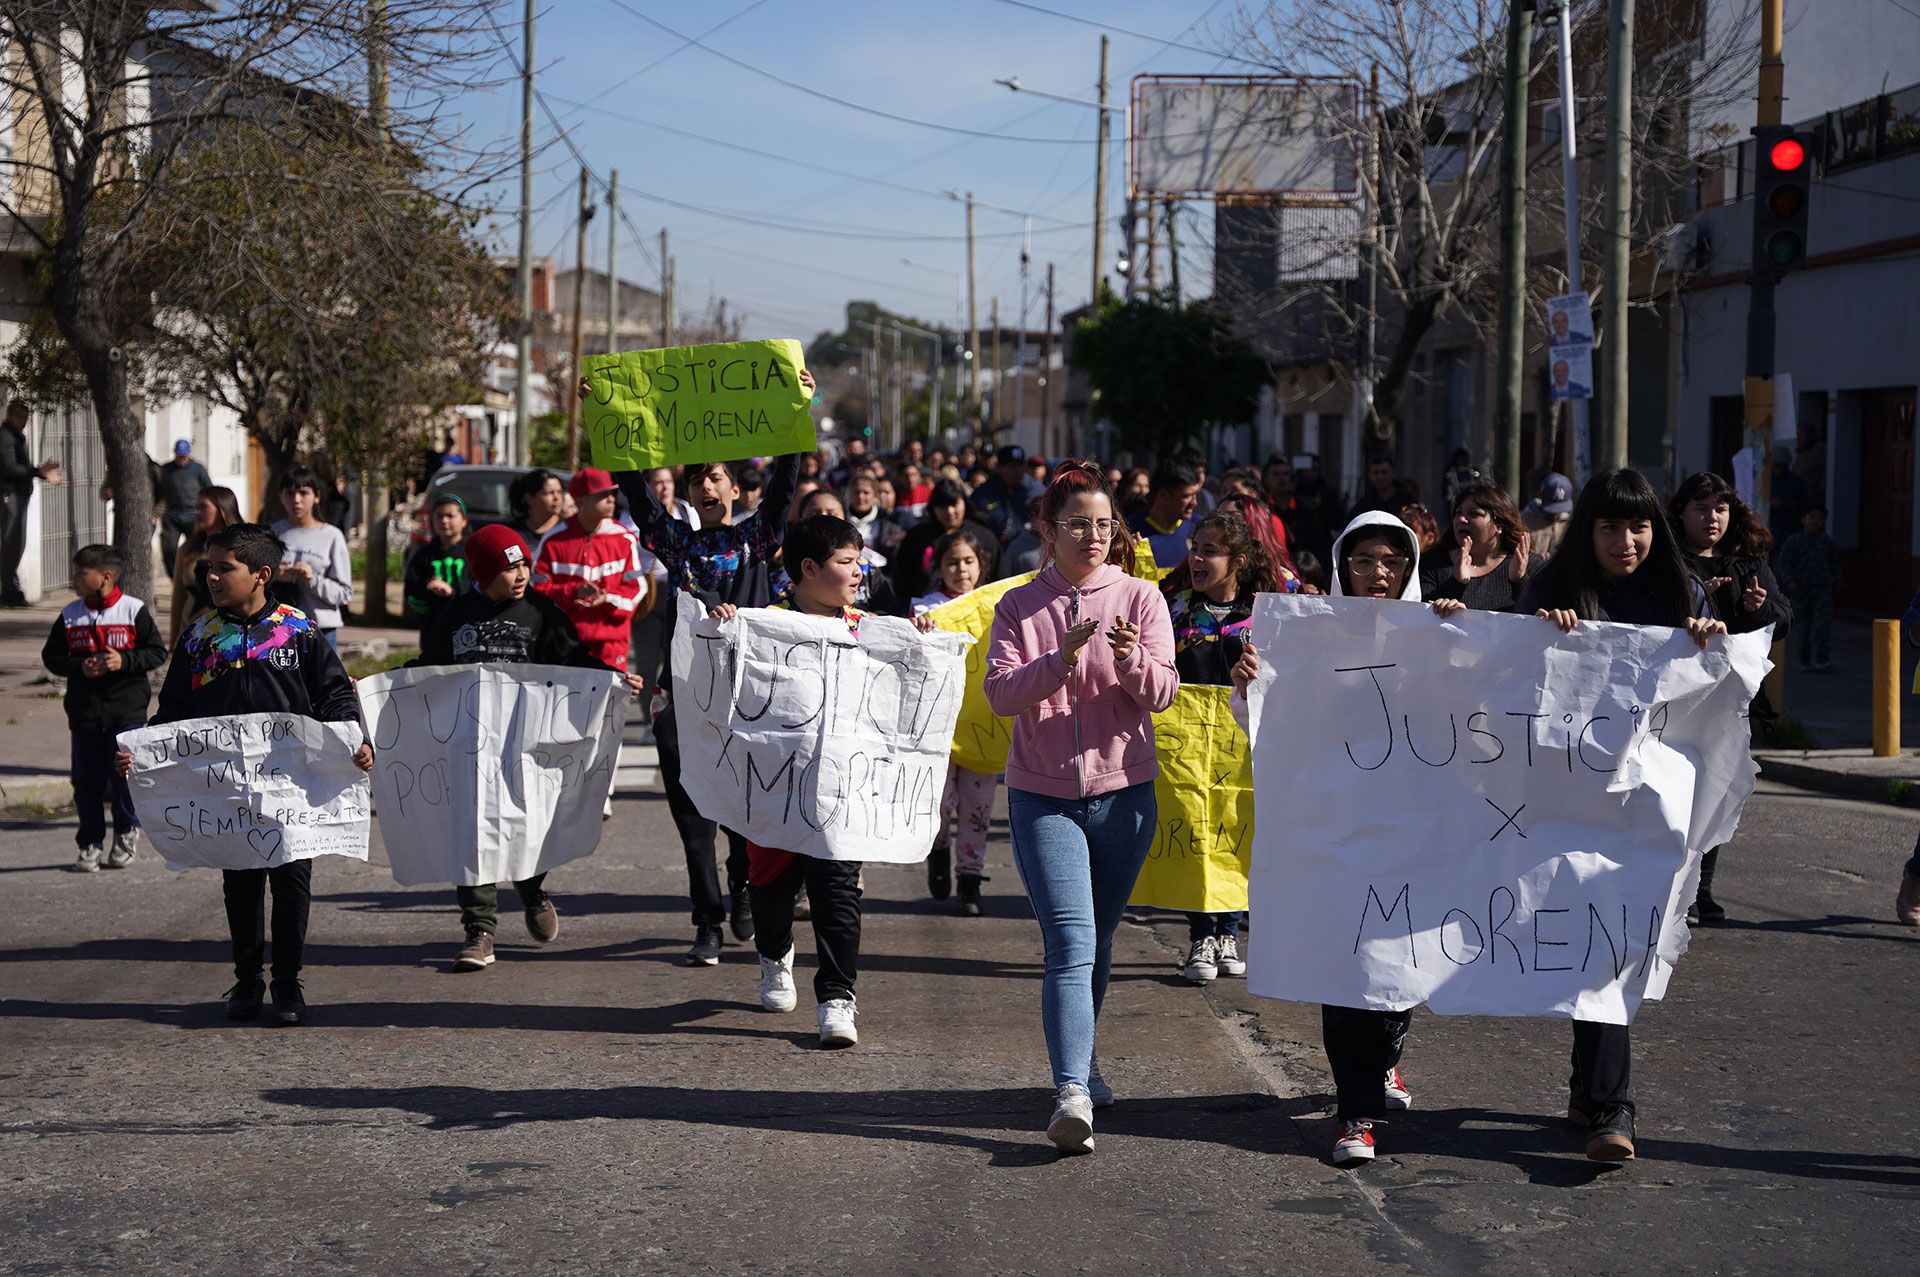 Neighbors of Lanús demonstrate in demand for justice (Franco Fafasuli)